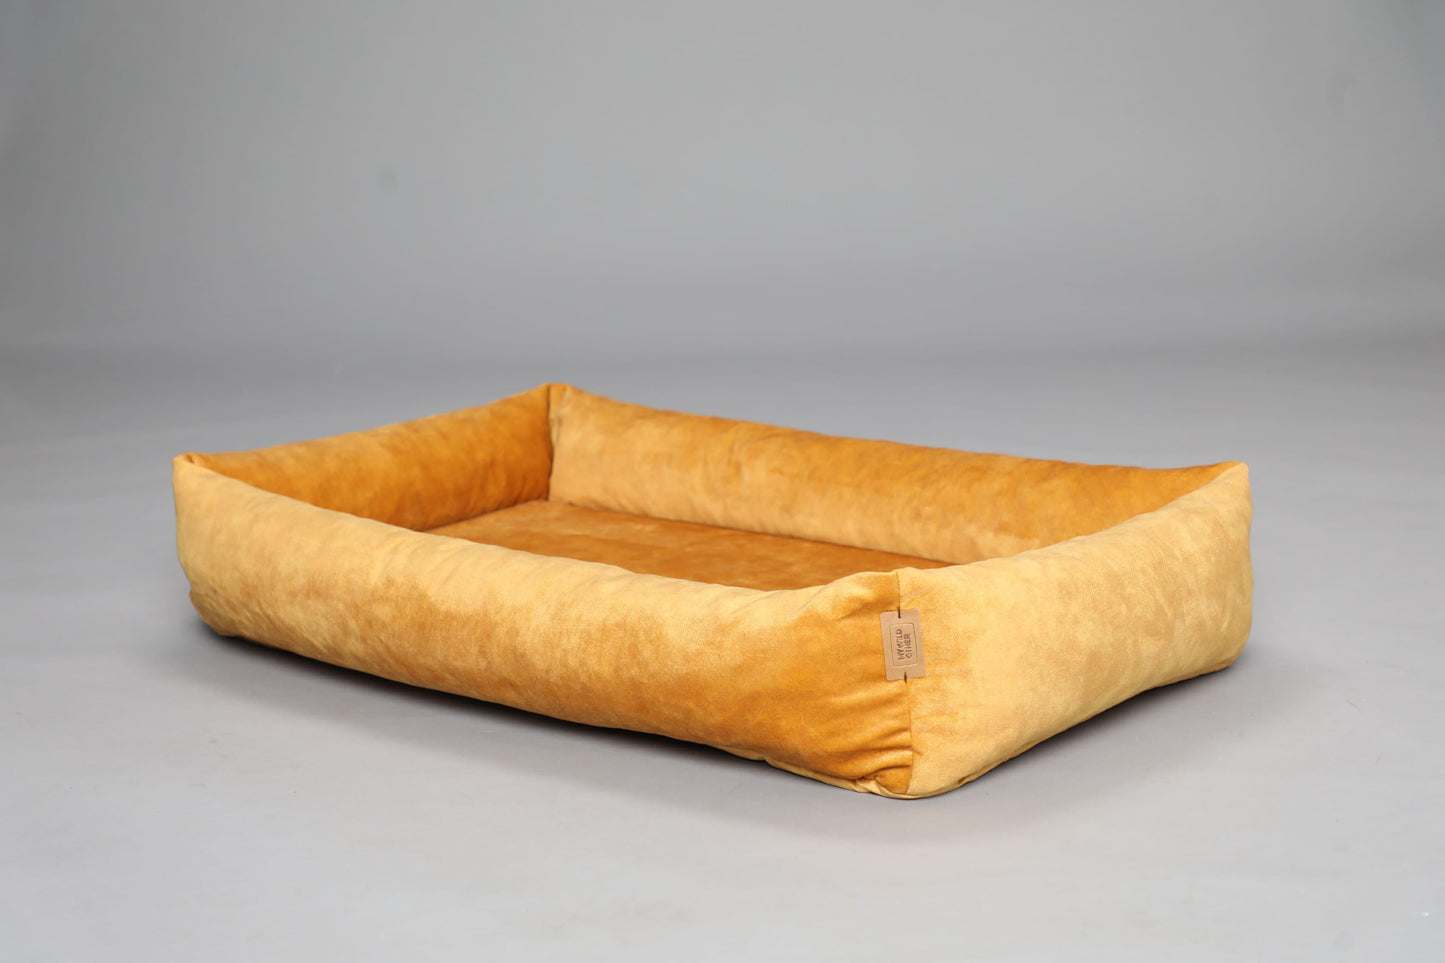 2-sided dog bed with sides. AMBER YELLOW - premium dog goods handmade in Europe by My Wild Other